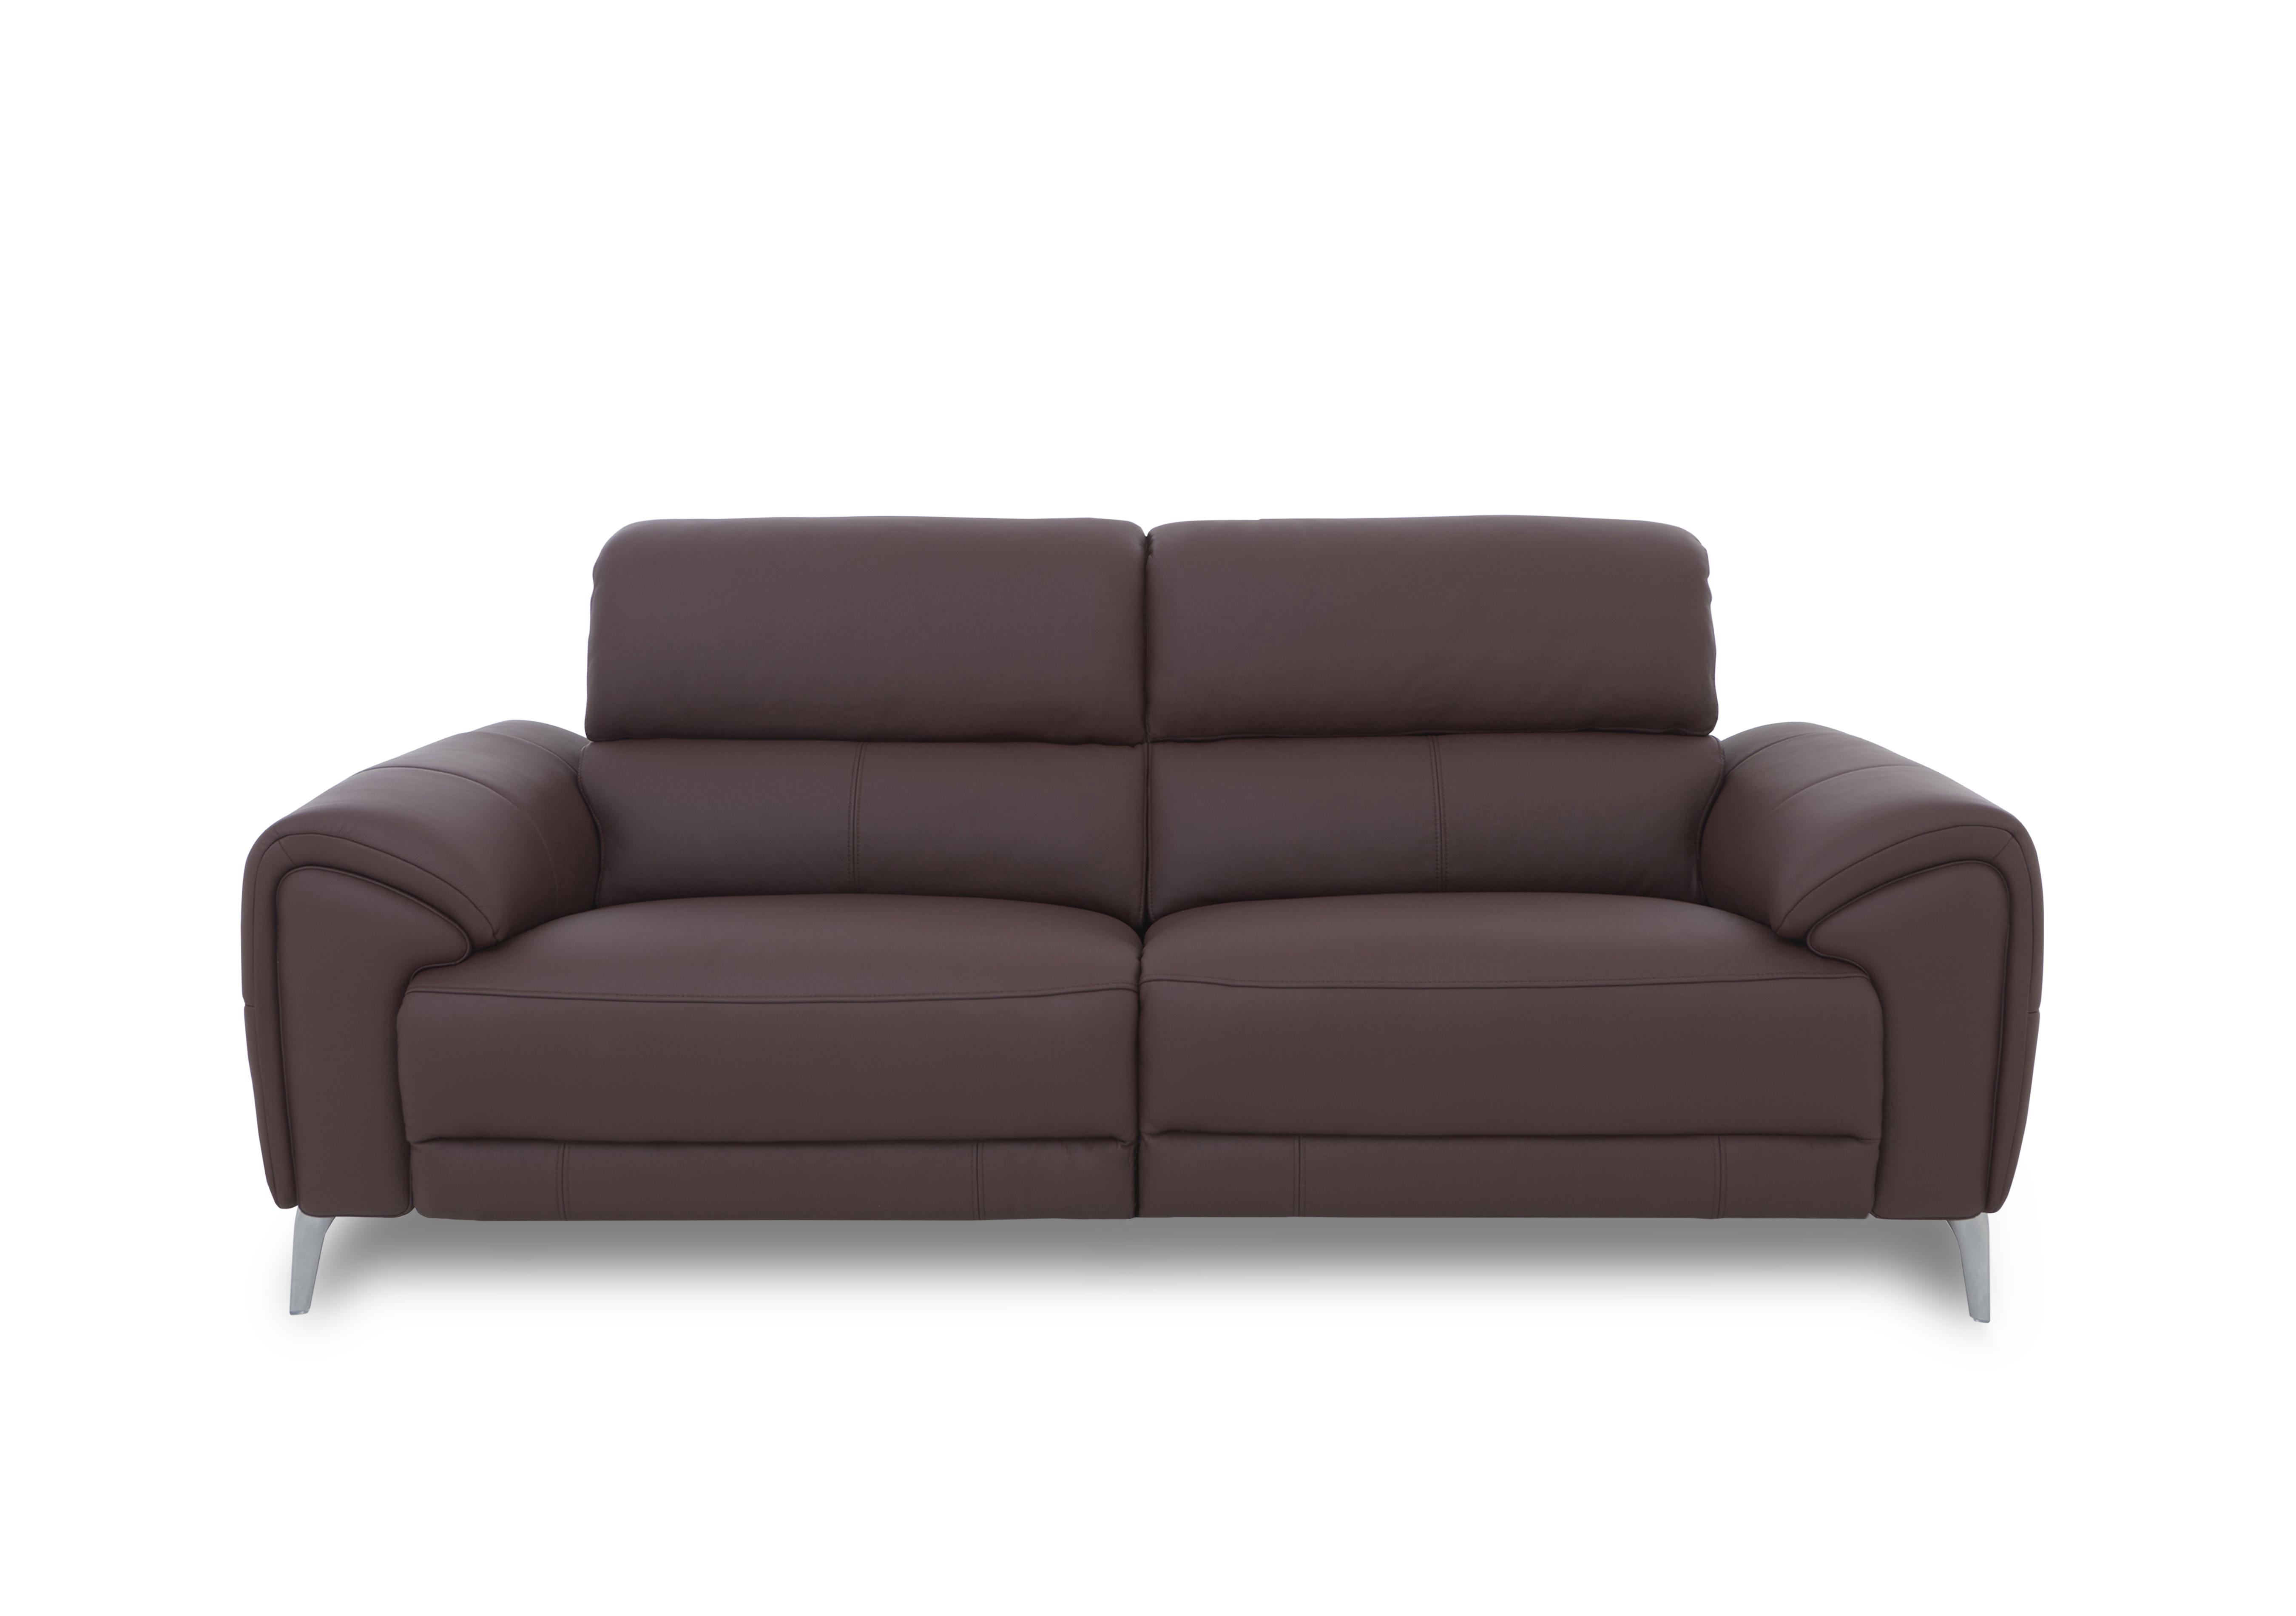 Vino Leather 3 Seater Sofa in Cat-40/30 Oslo Mulberry on Furniture Village